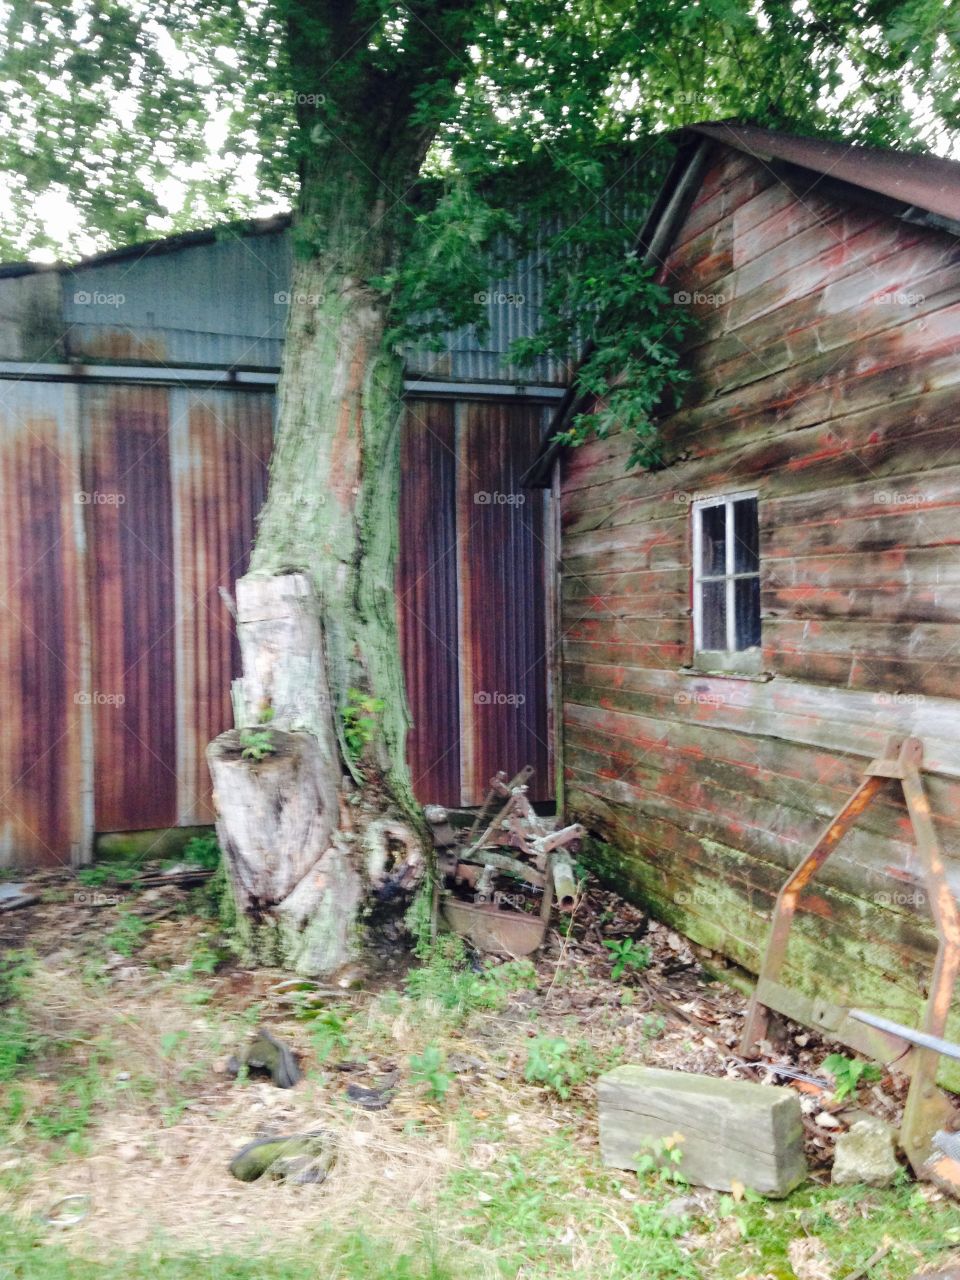 Life forgotten . Tree grown around this plow behind a forgotten shed